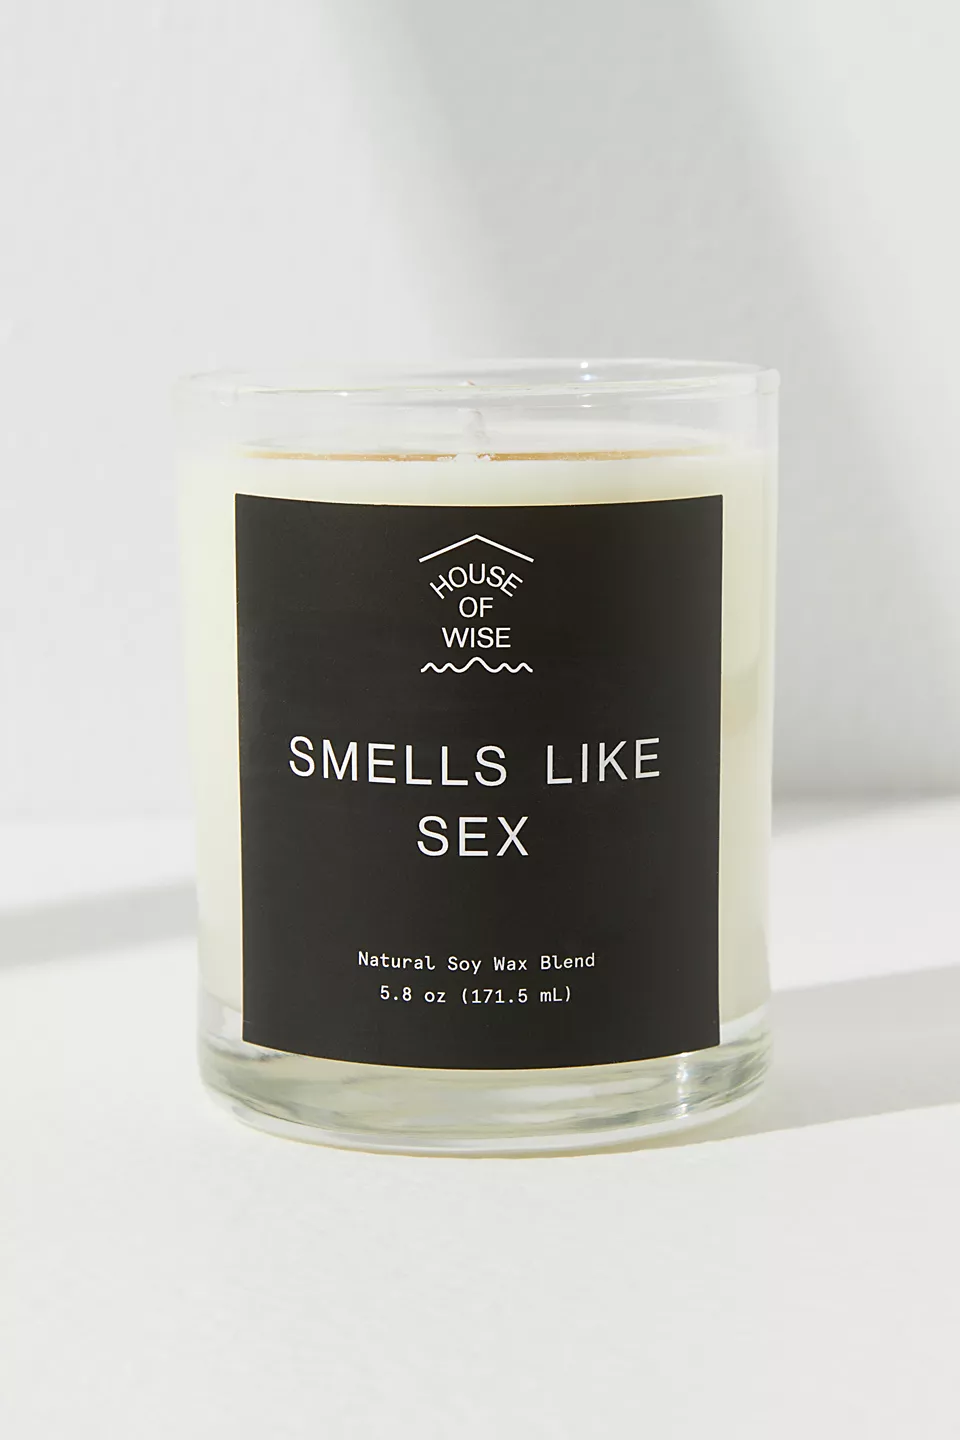 freepeople.com | House of Wise Smells Like Sex Candle